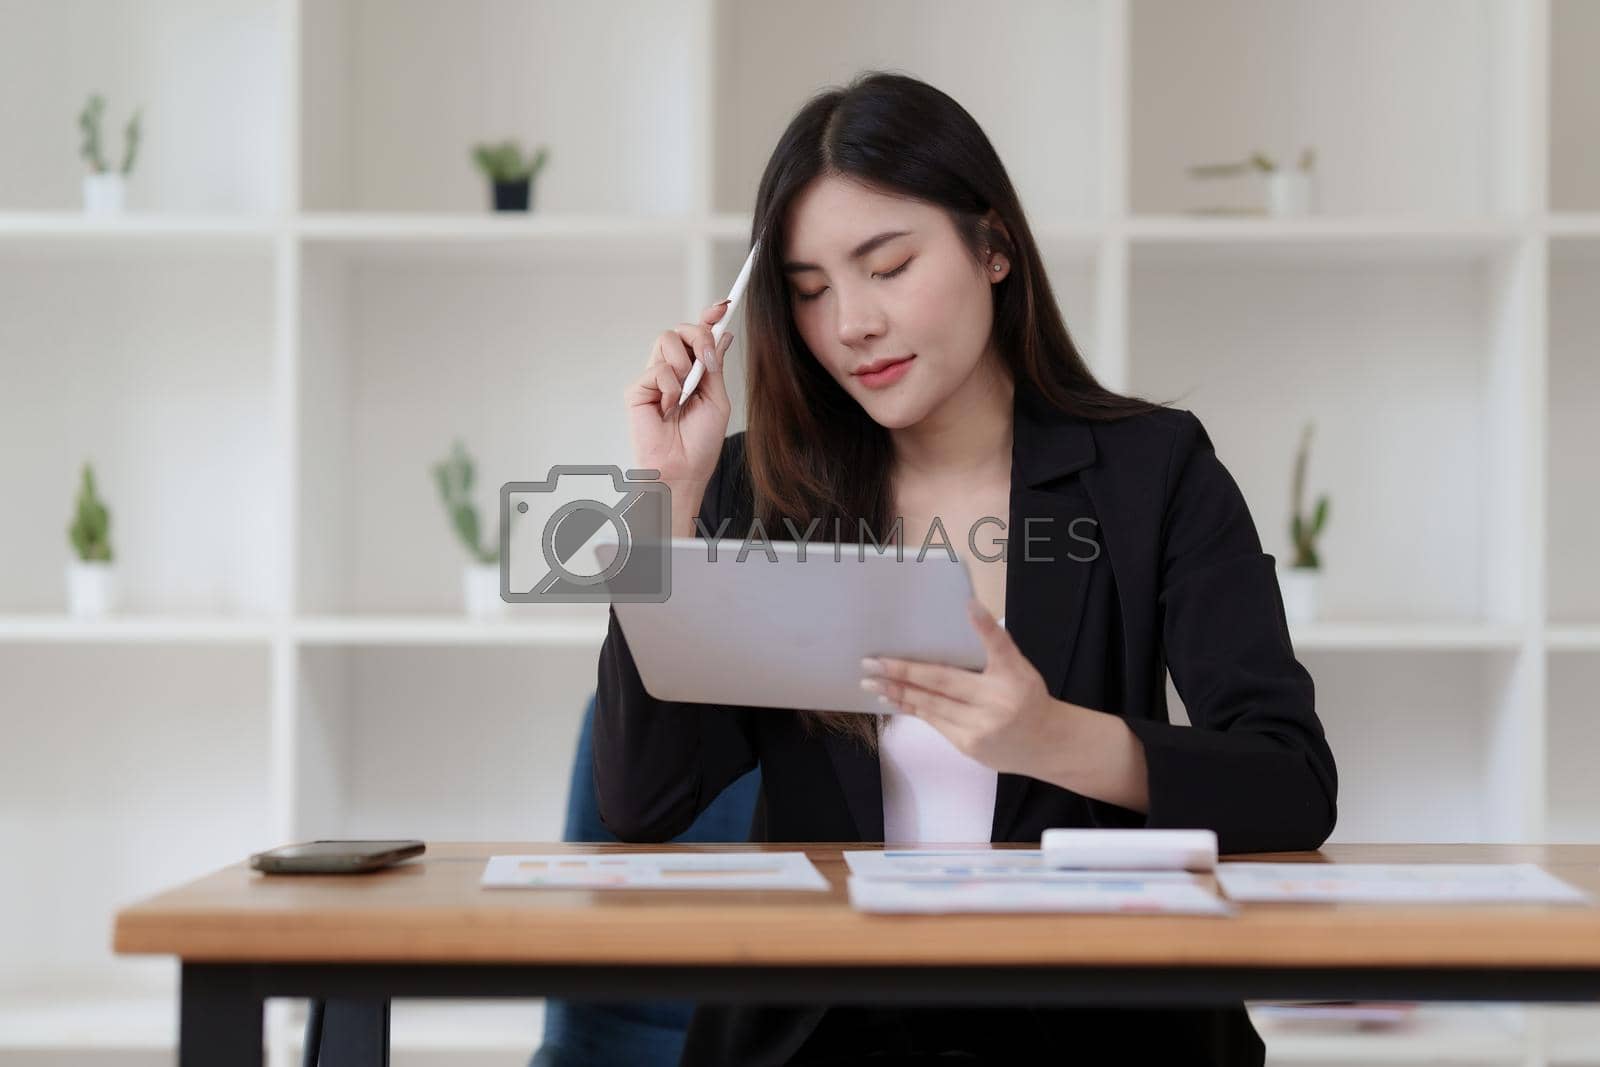 Royalty free image of Accountant checking data document on digital tablet for investigation of corruption account by itchaznong